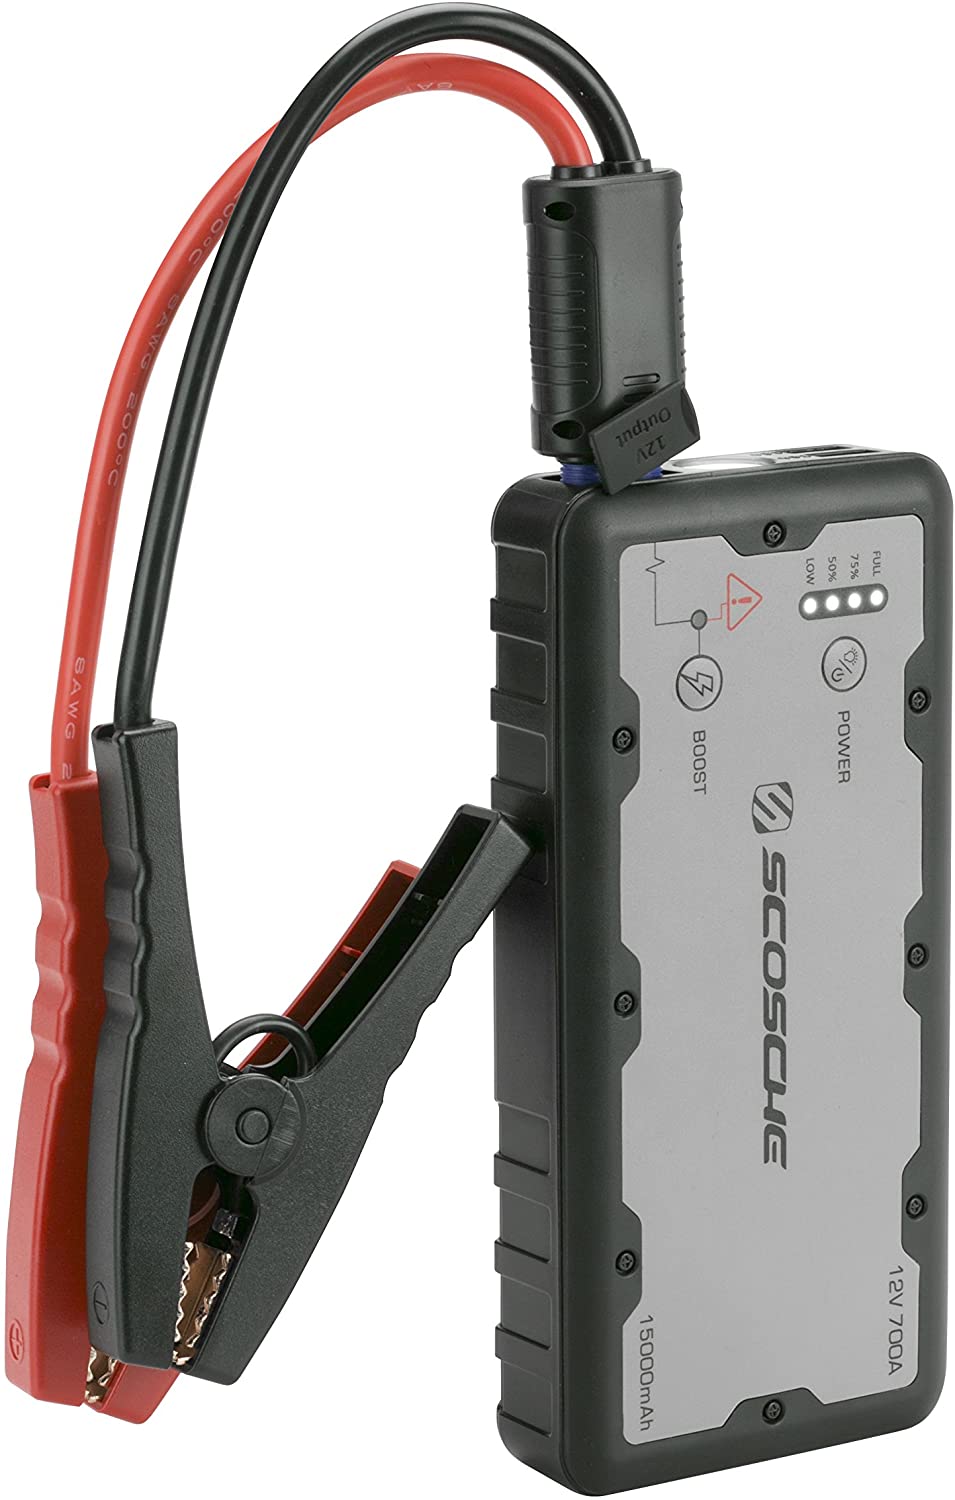 Scosche Battery Charger Render Cropped